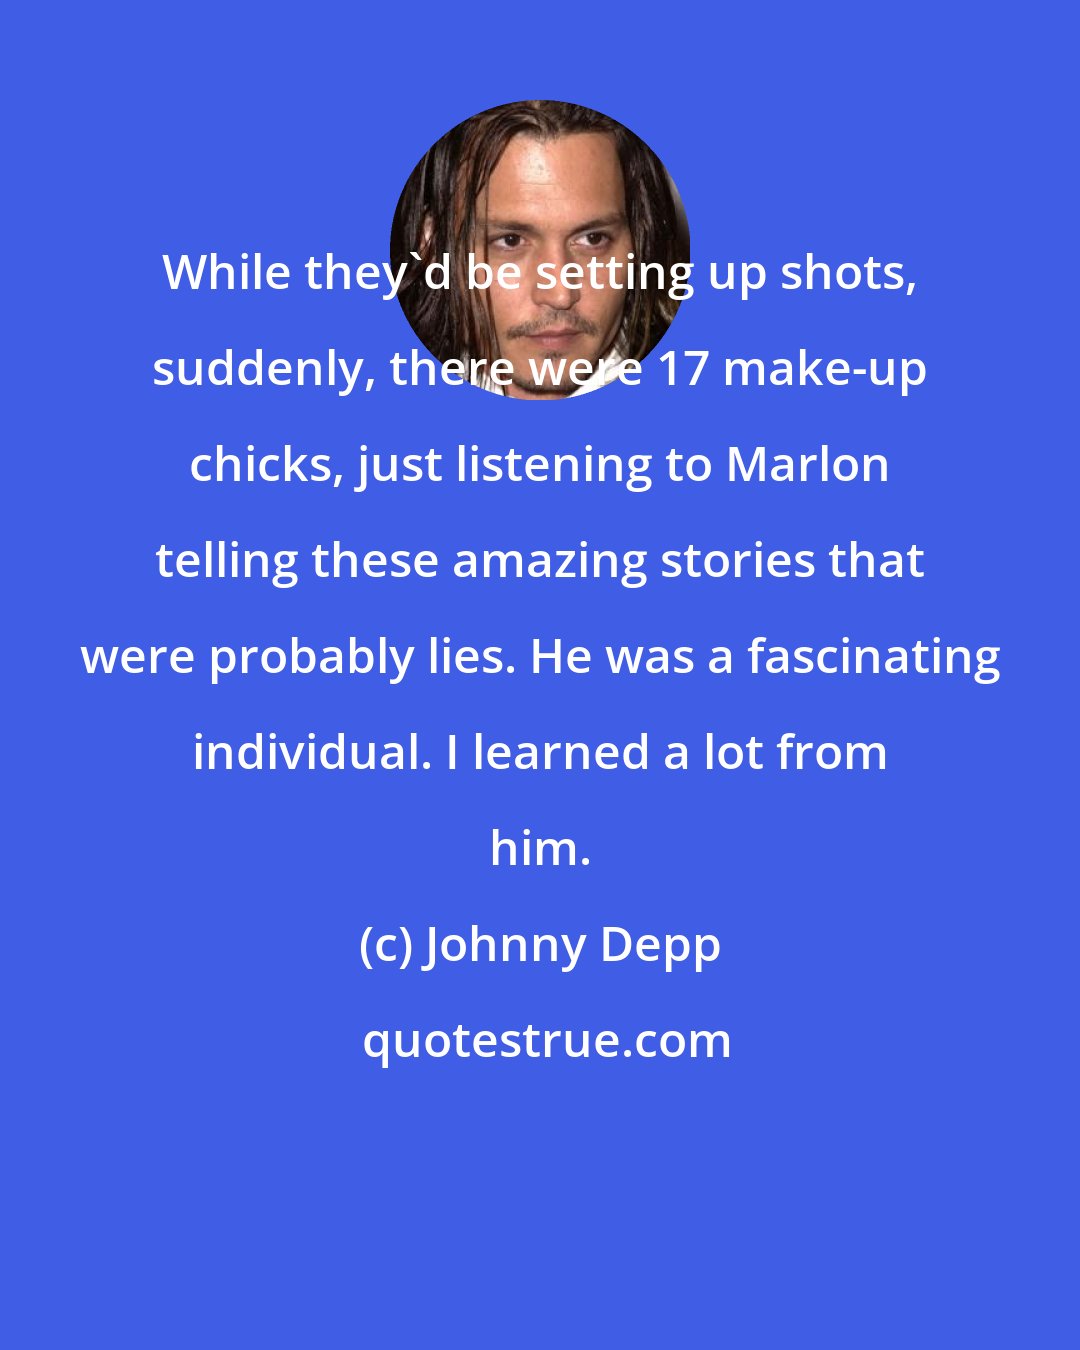 Johnny Depp: While they'd be setting up shots, suddenly, there were 17 make-up chicks, just listening to Marlon telling these amazing stories that were probably lies. He was a fascinating individual. I learned a lot from him.